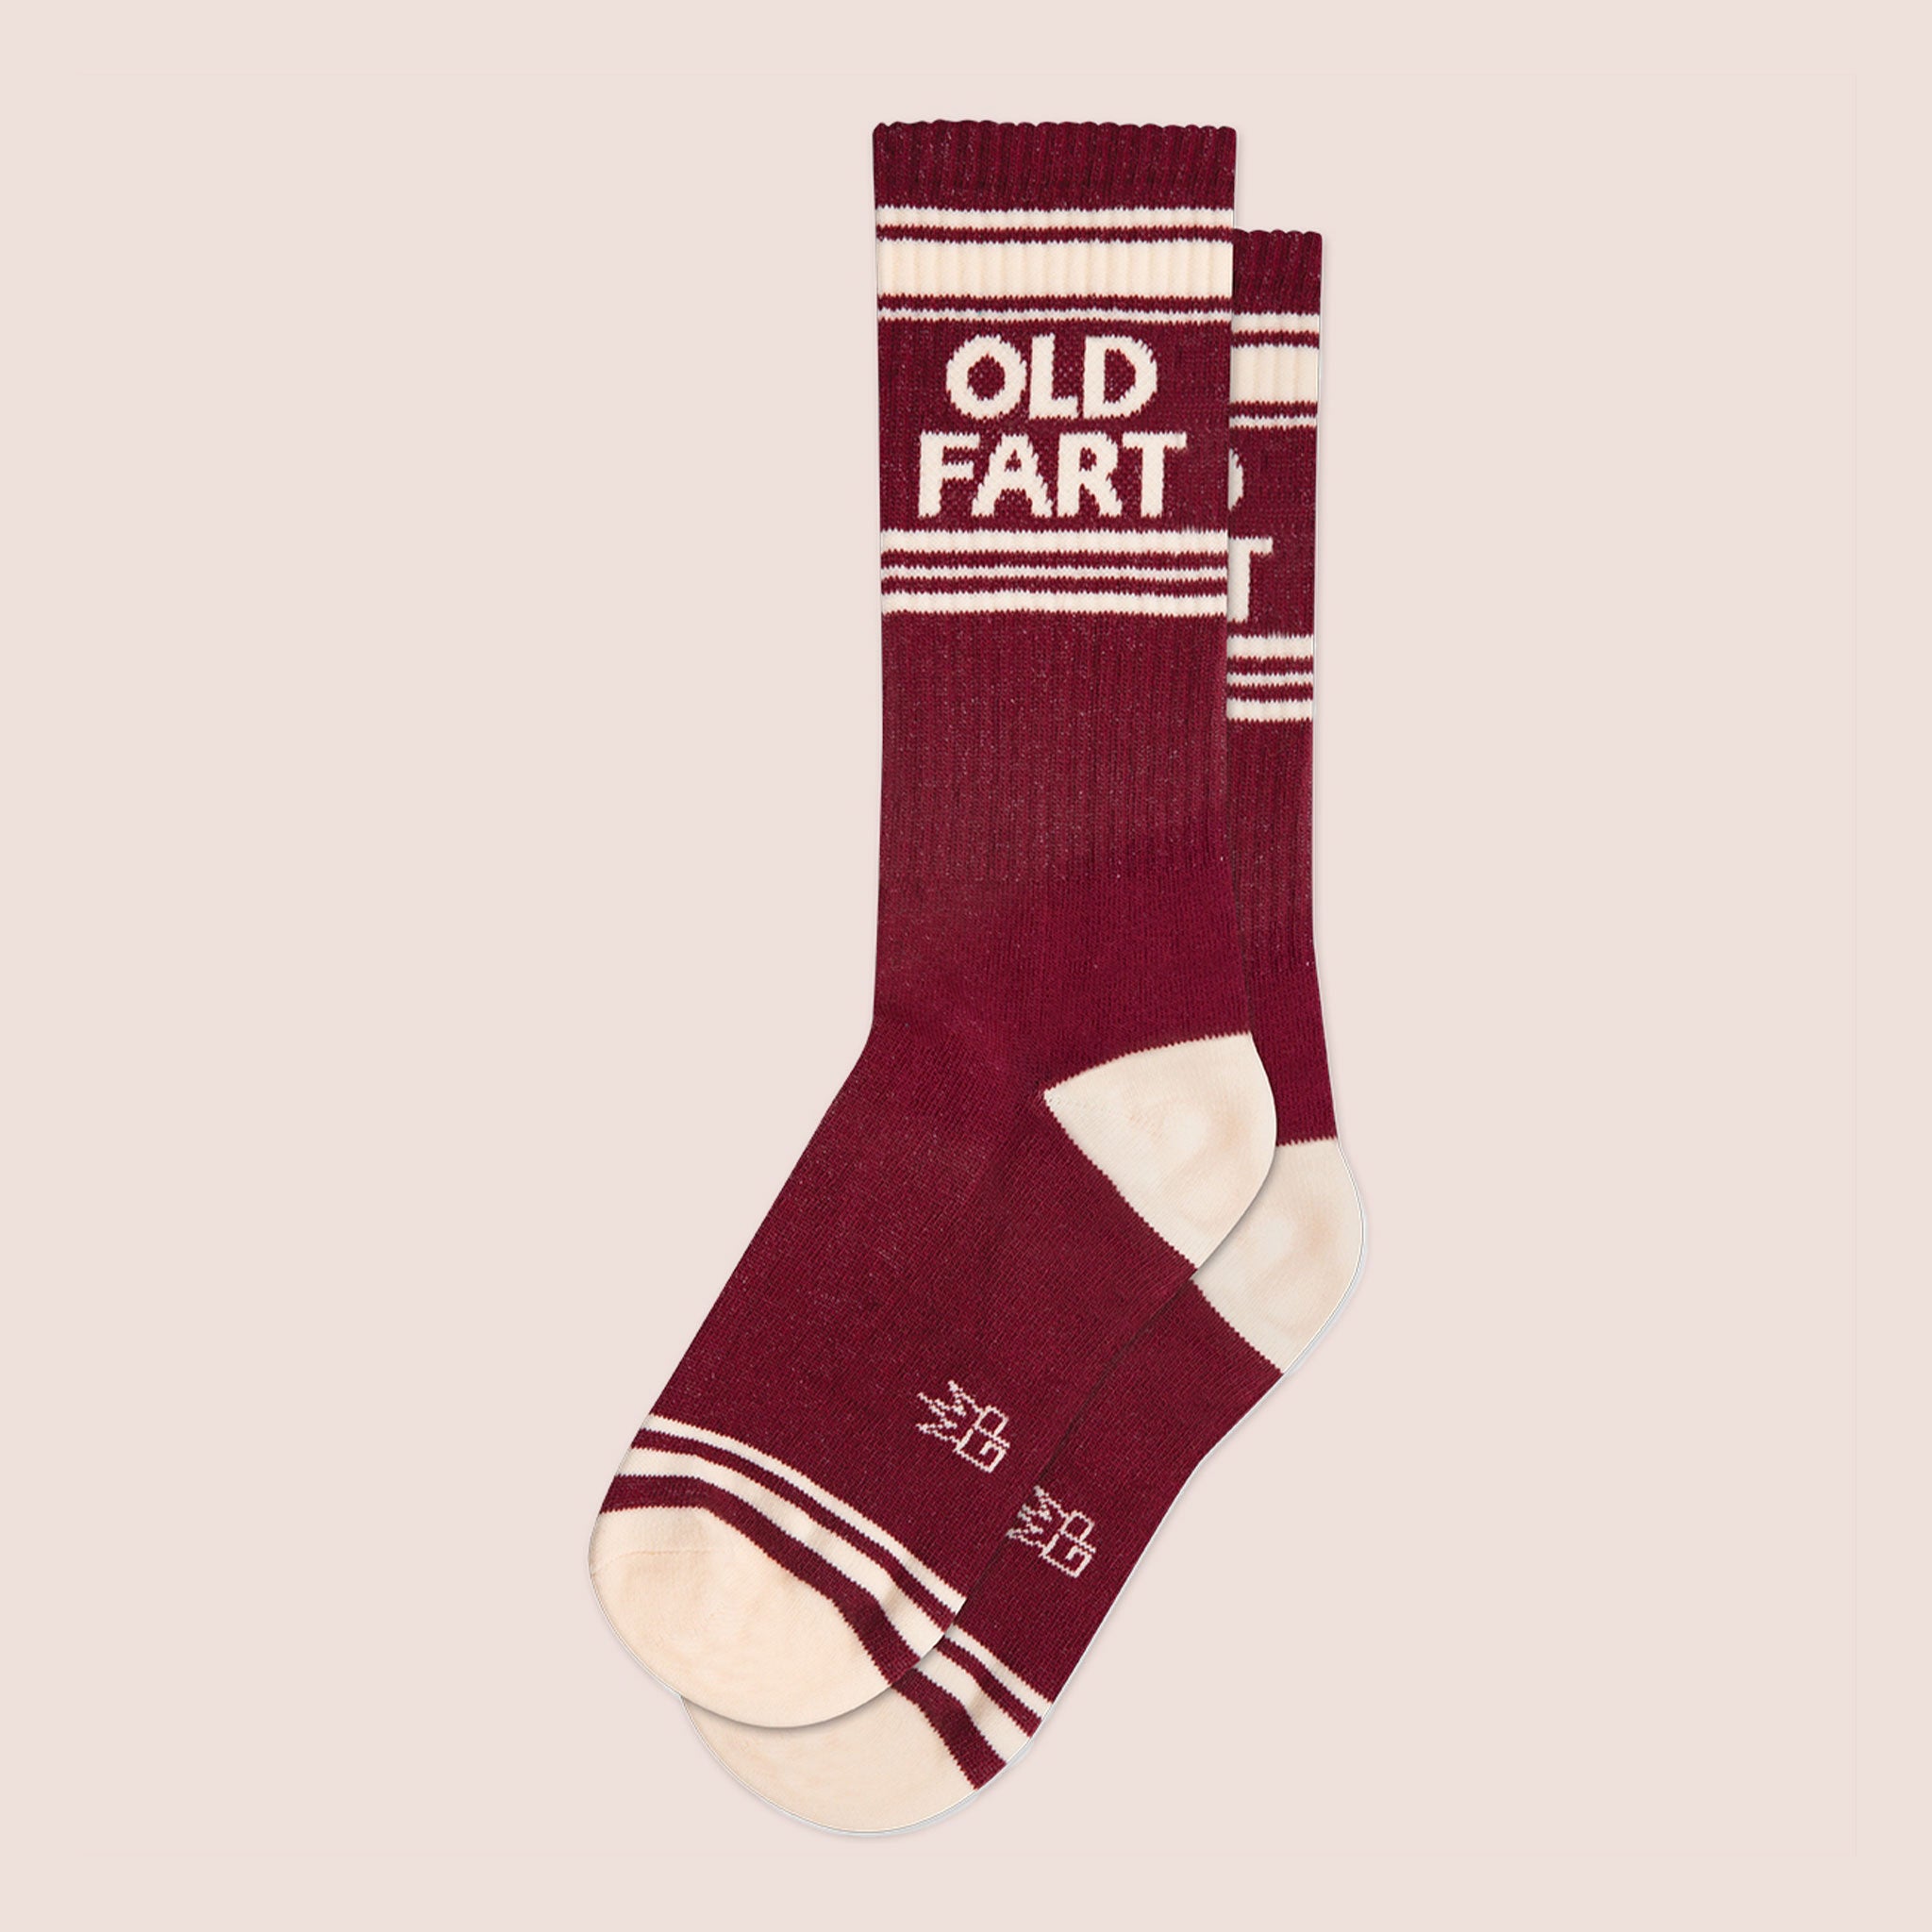 A pair of dark red socks with ivory details and text at the top that reads, &quot;Old Fart&quot;.